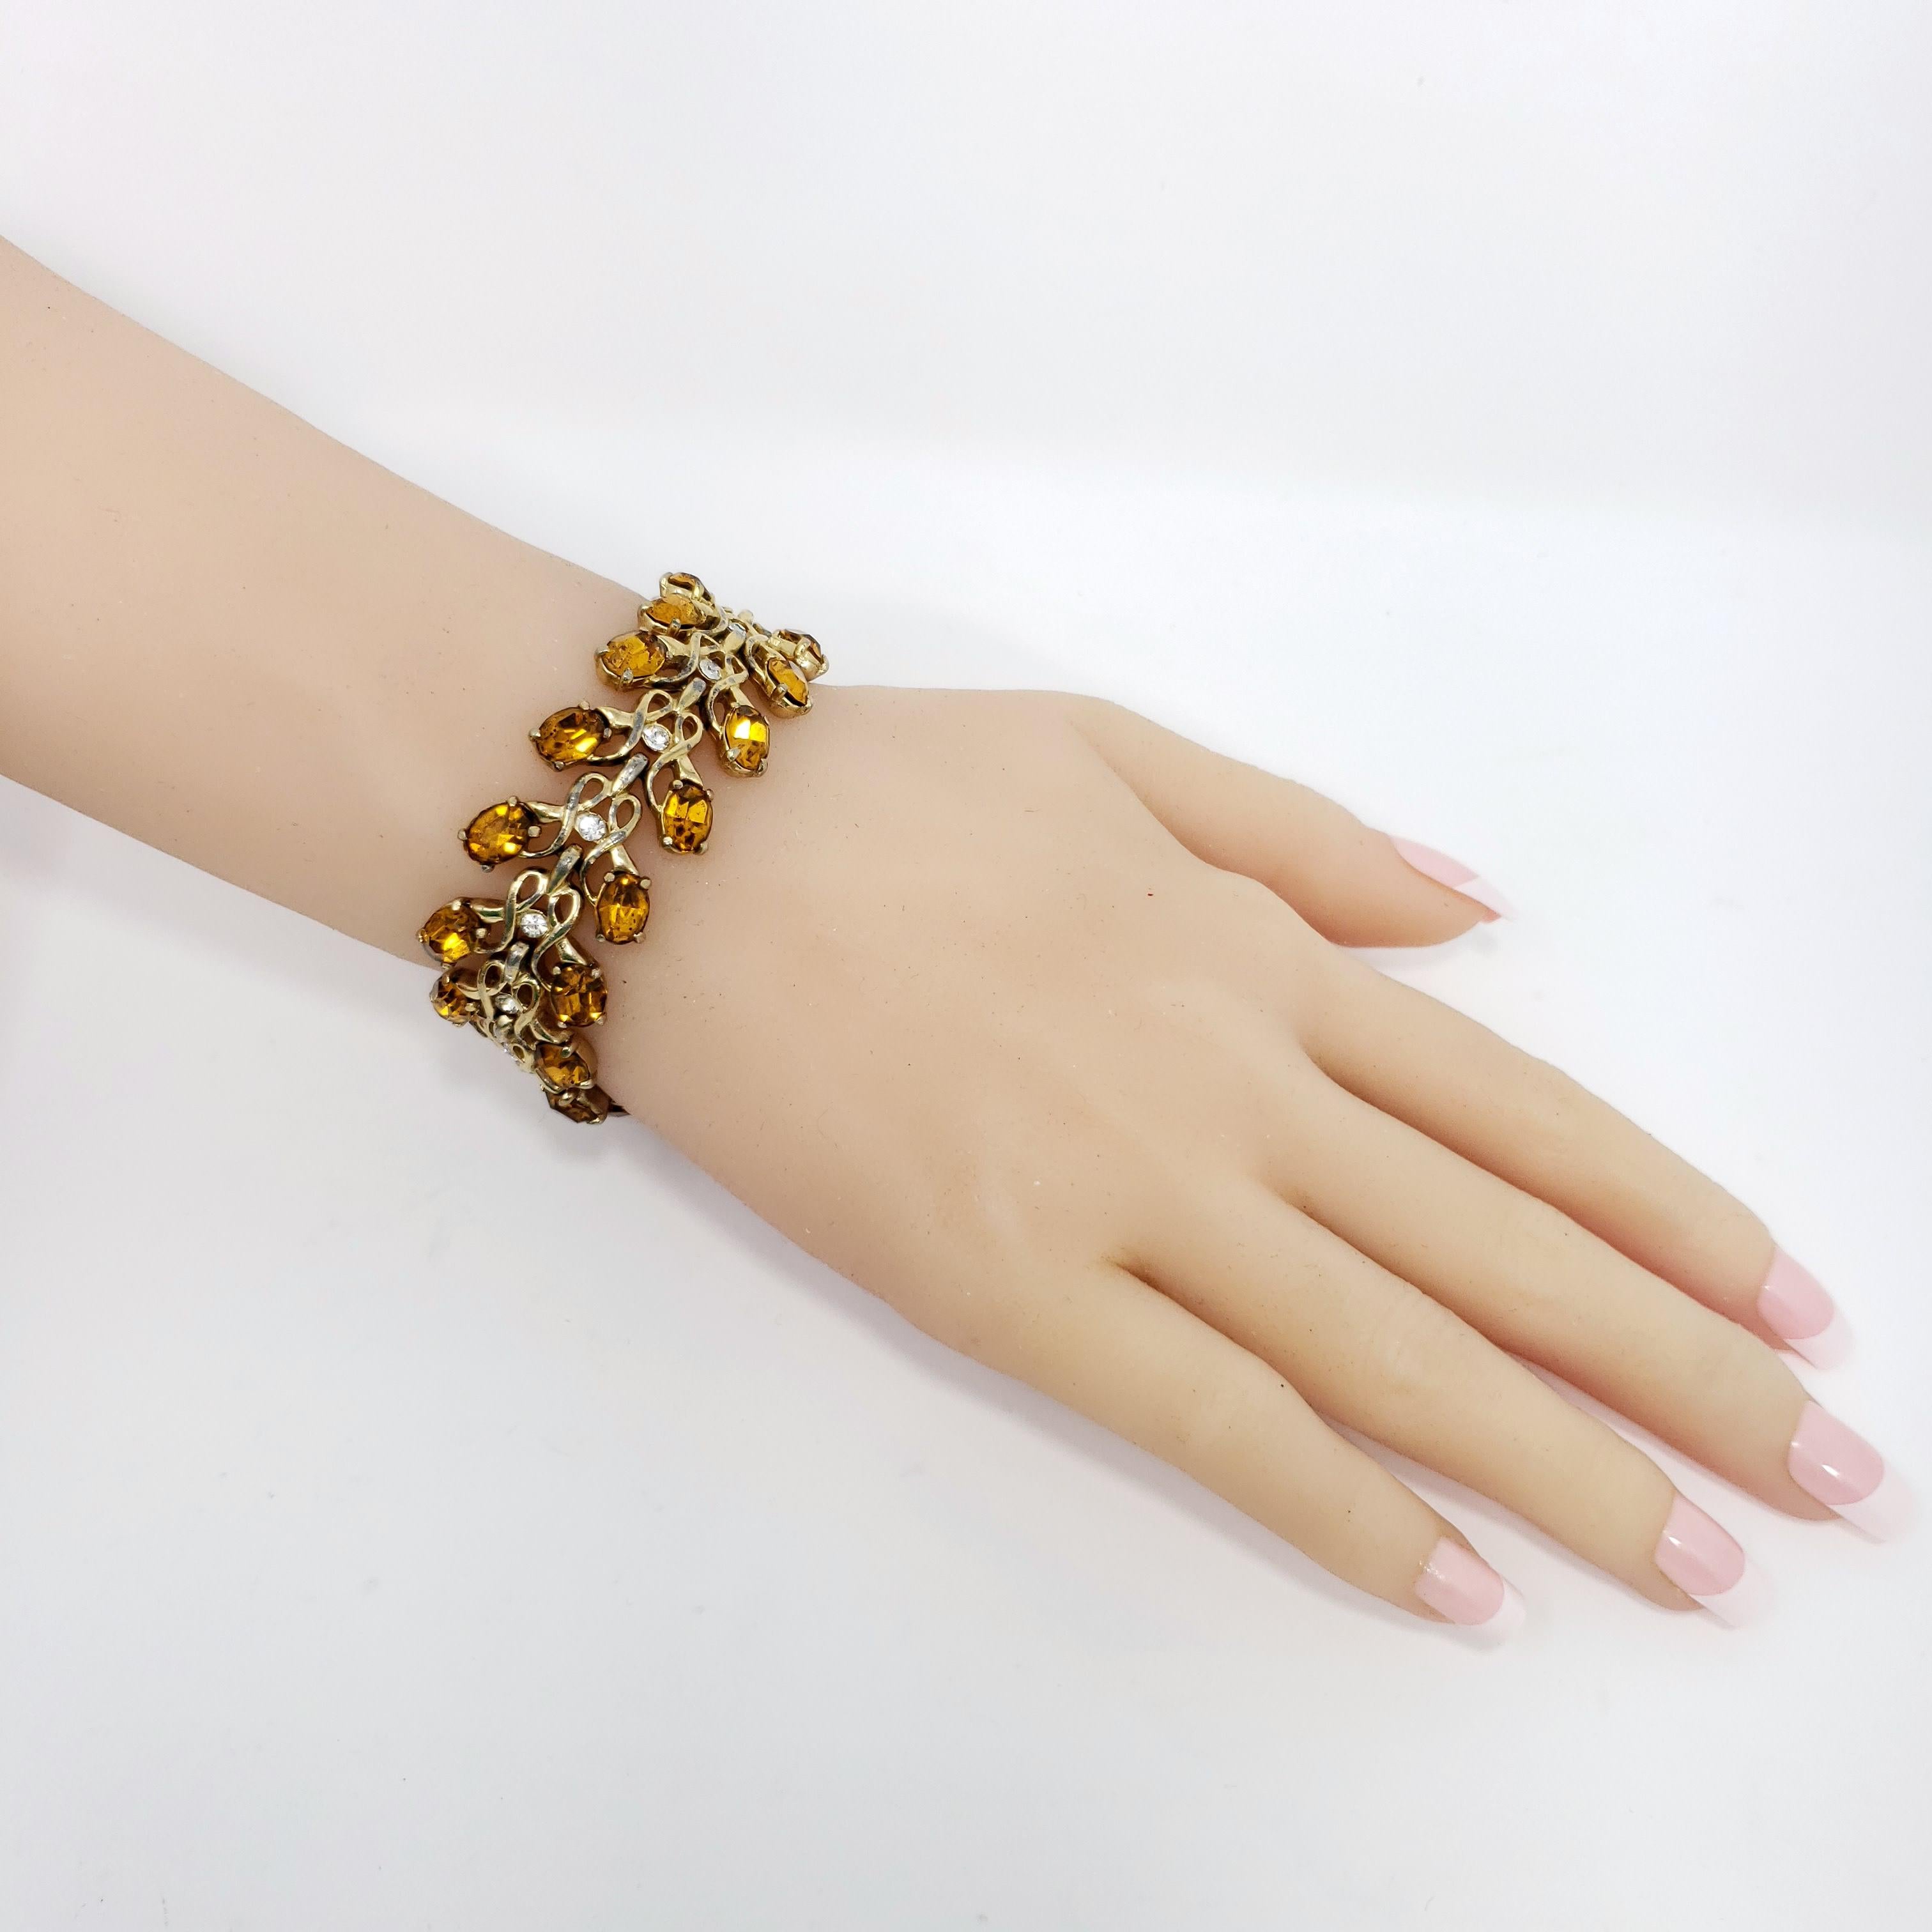 Stylish retro bracelet, featuring golden links decorated with amber and clear crystals.

Gold-plated